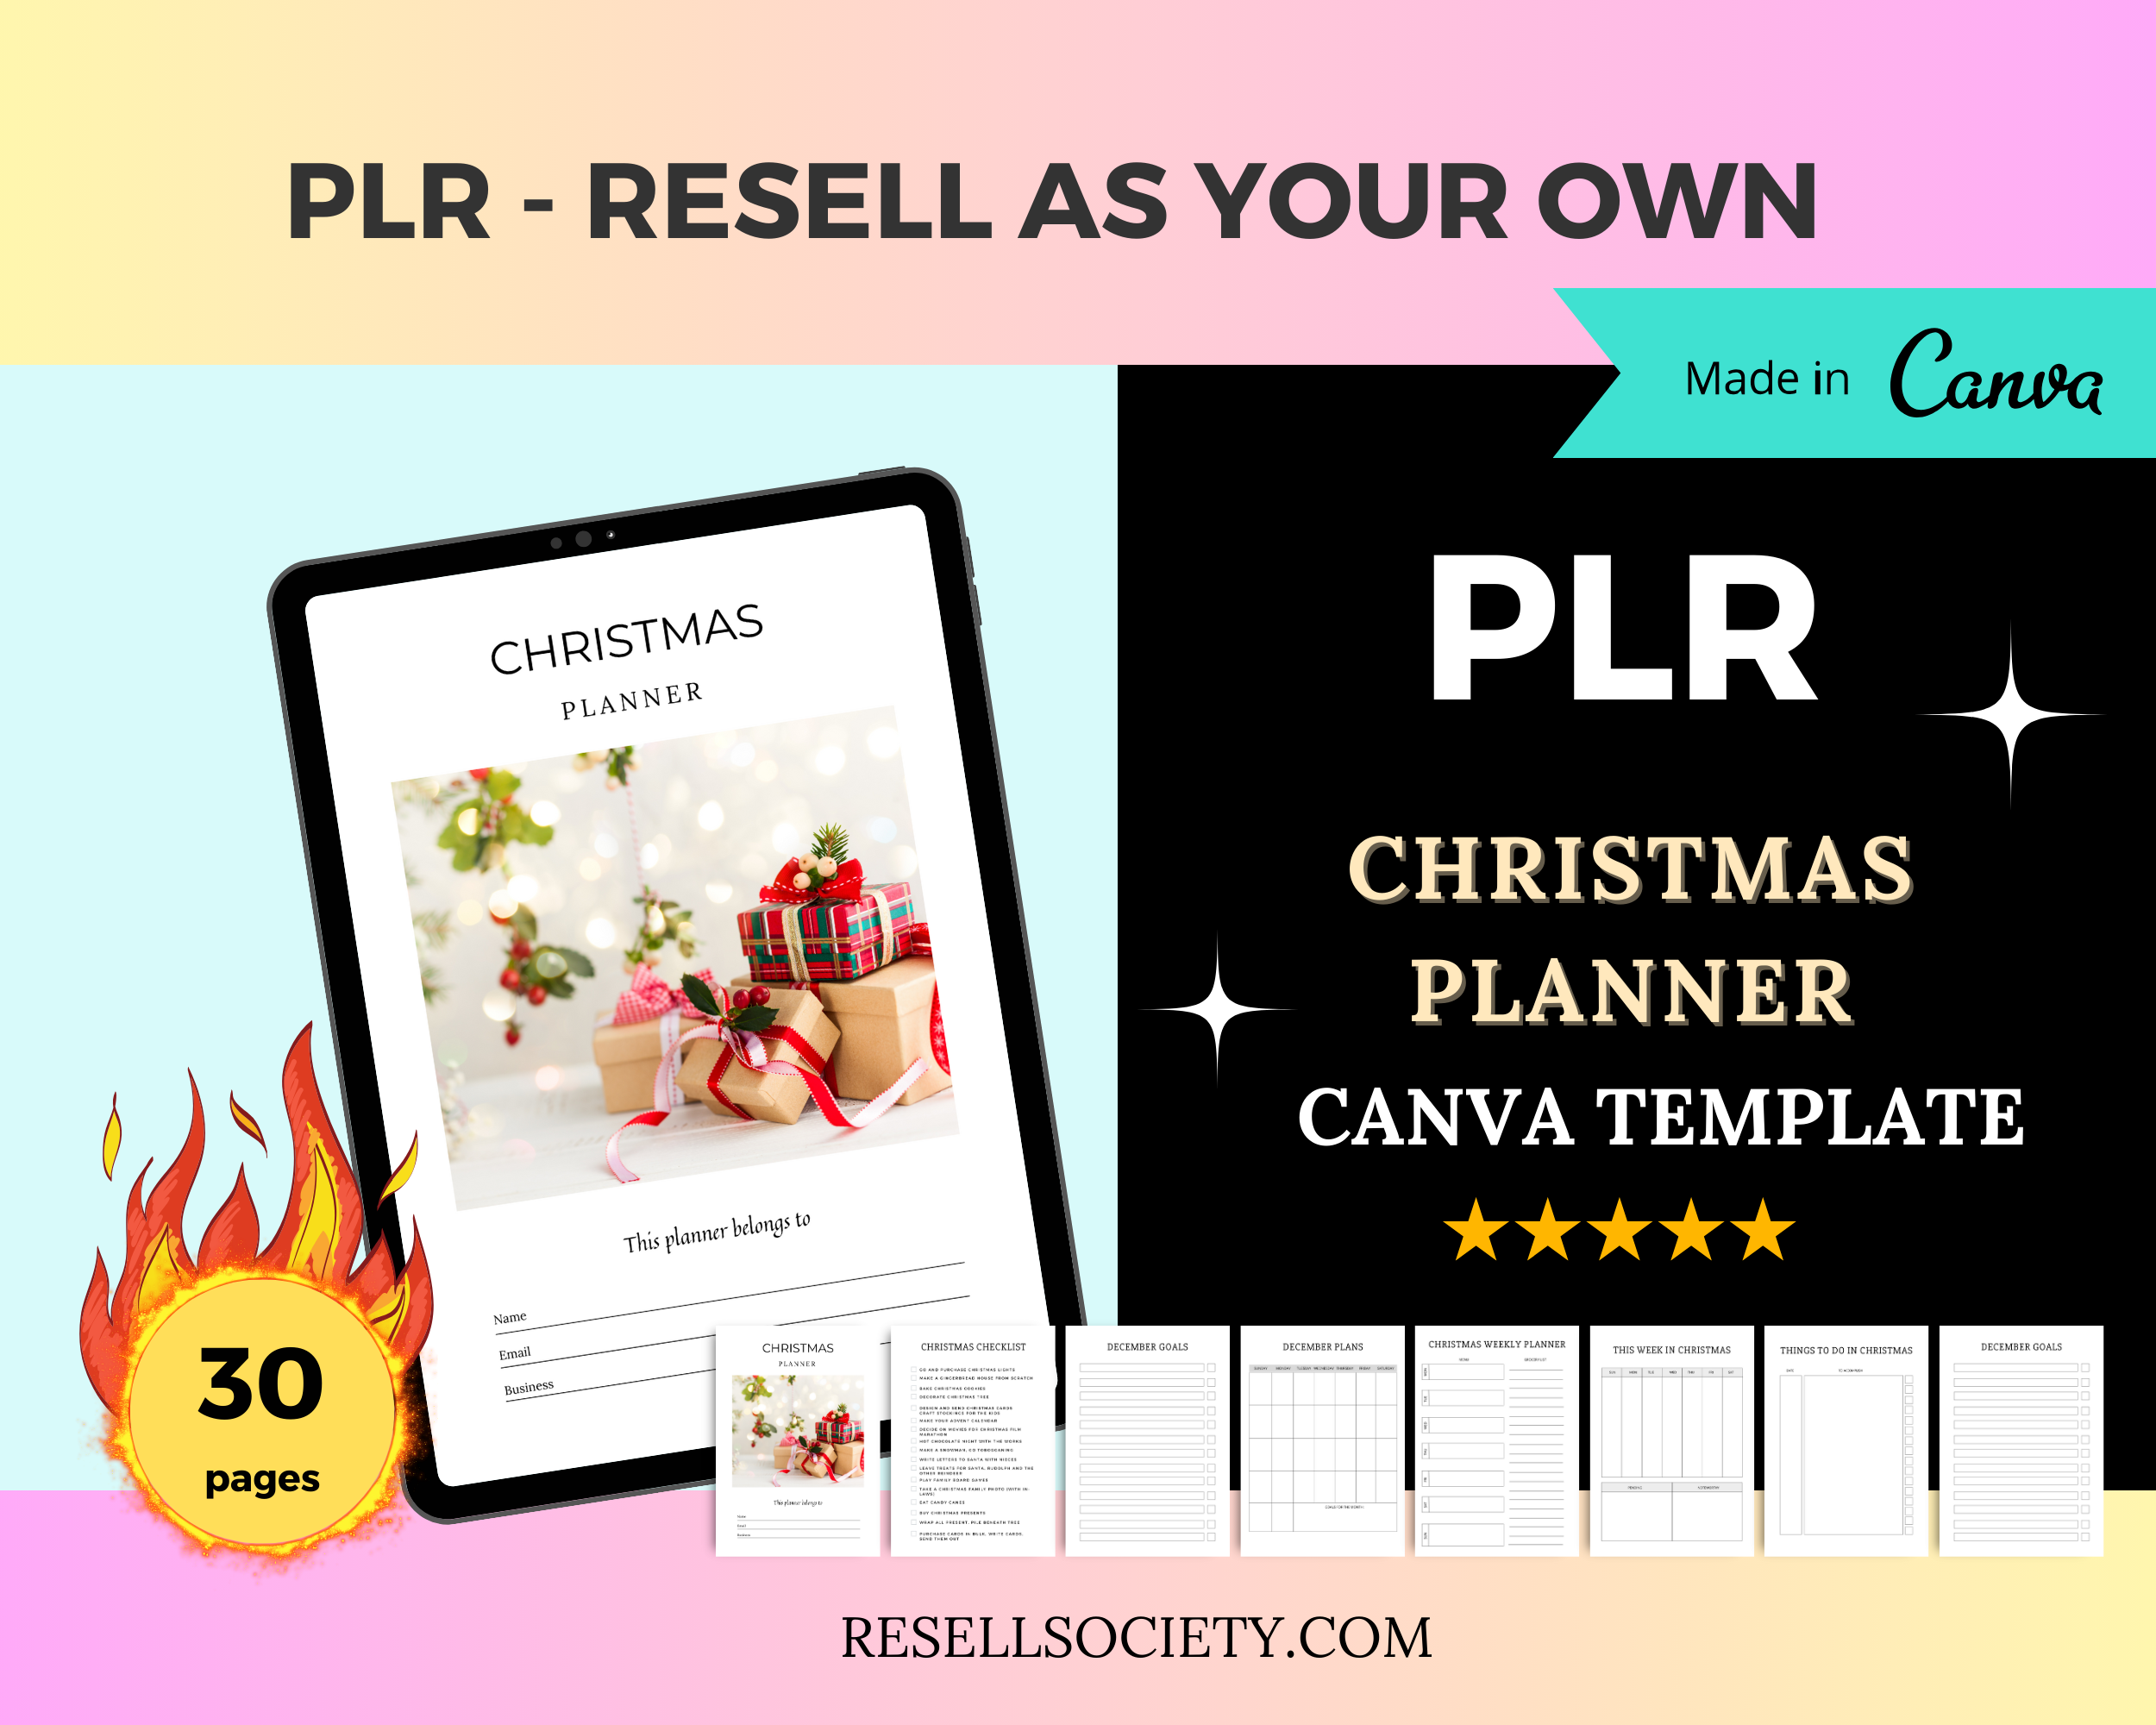 Editable Christmas Planner in Canva | Canva Template Pack | Christmas Planner Canva | Commercial Use